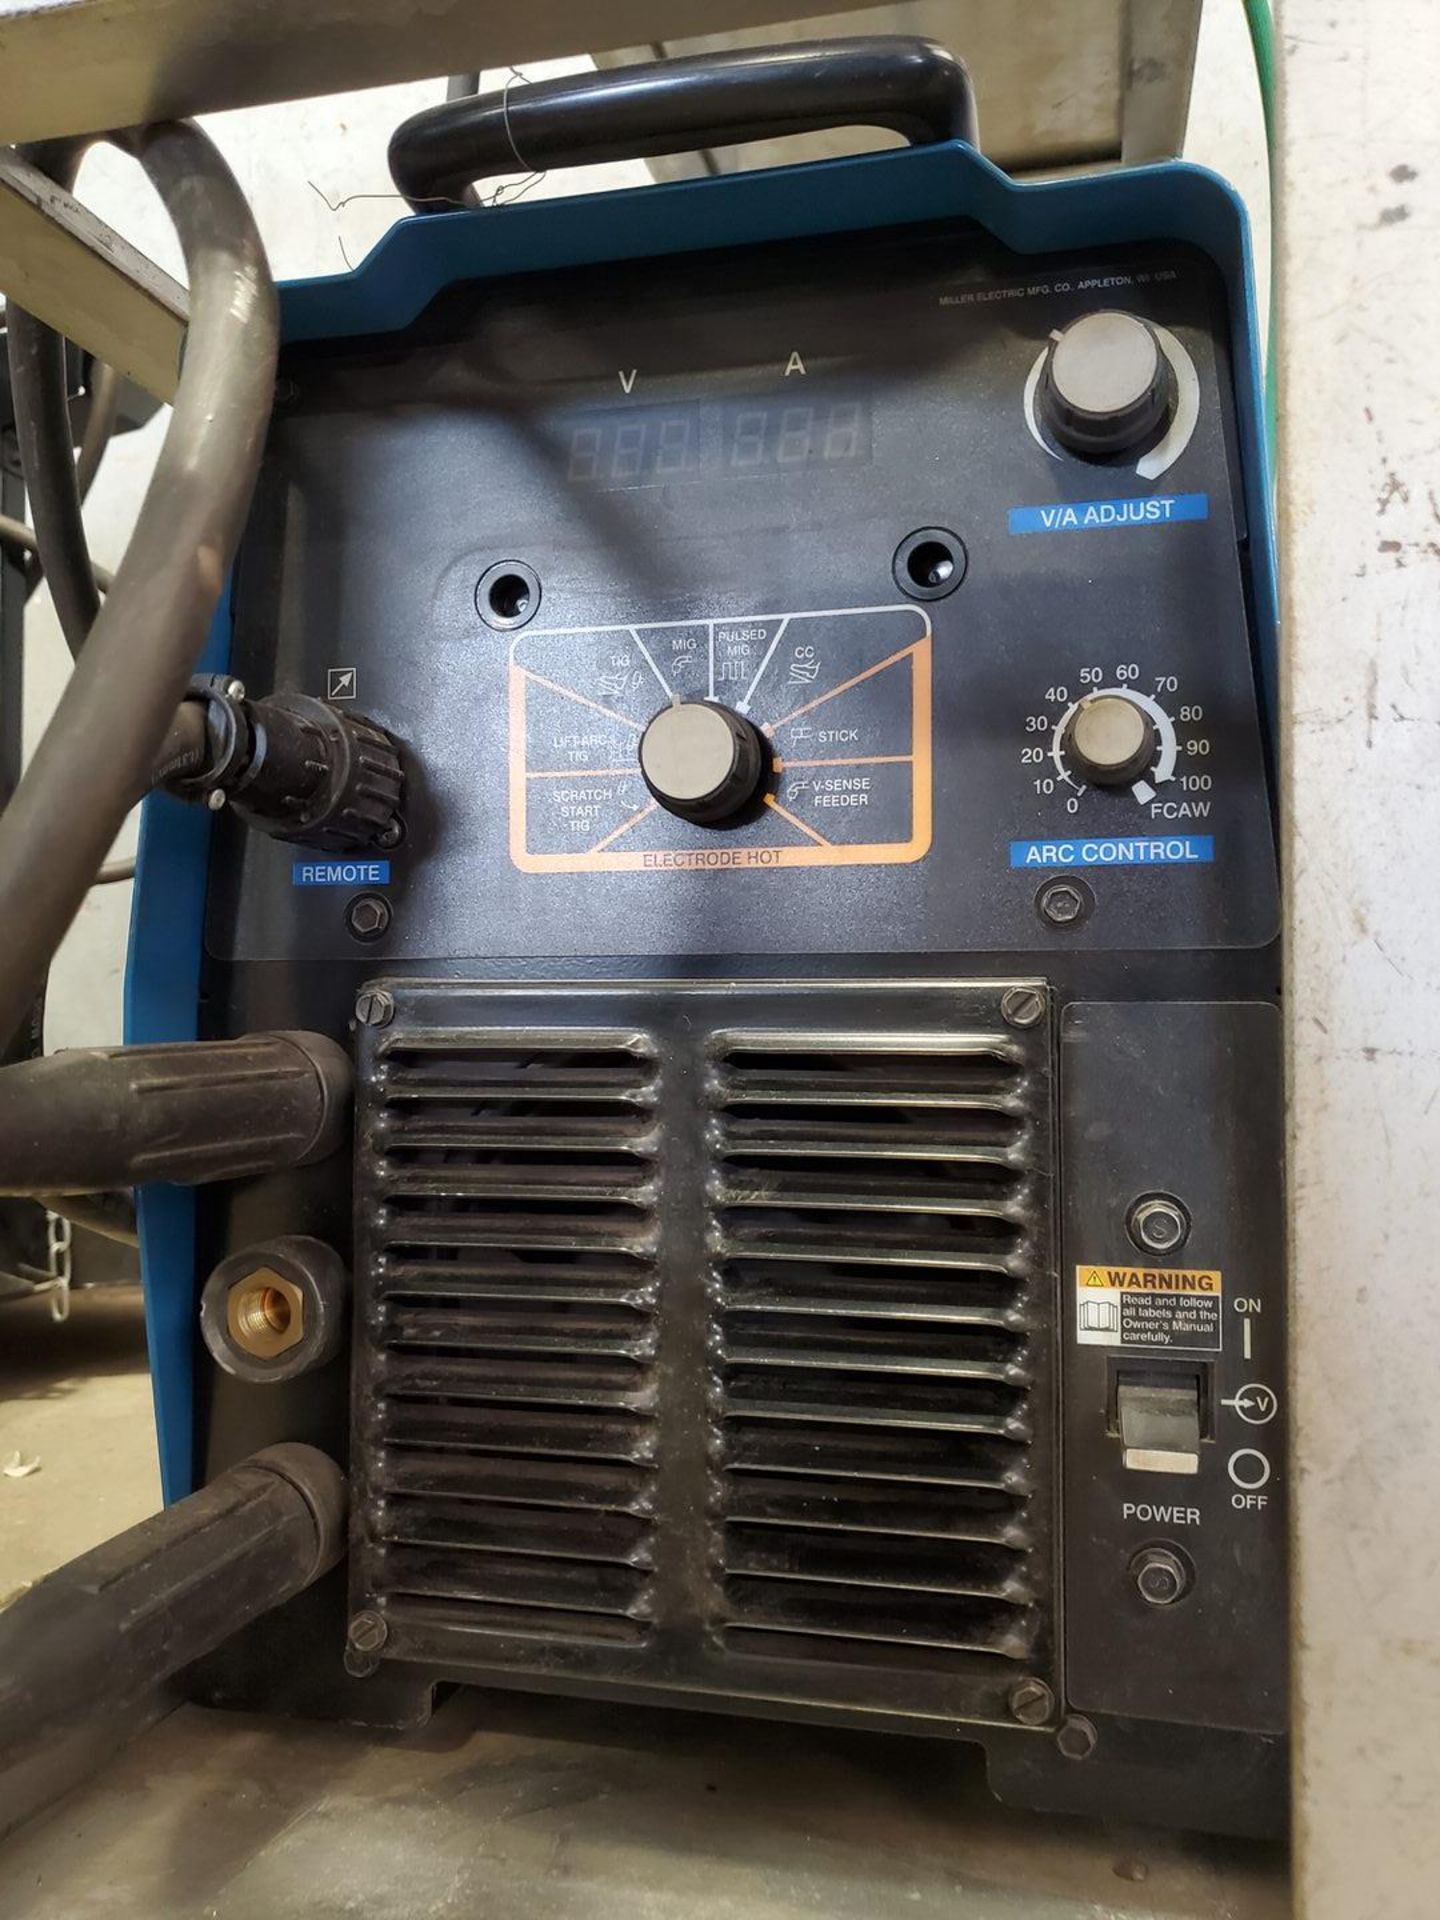 Miller XMT 350 CC/CV Multiprocessing Welder 208-575V, 350A, 1/3PH, 50/60HZ; W/ 20 Series Wire - Image 4 of 8